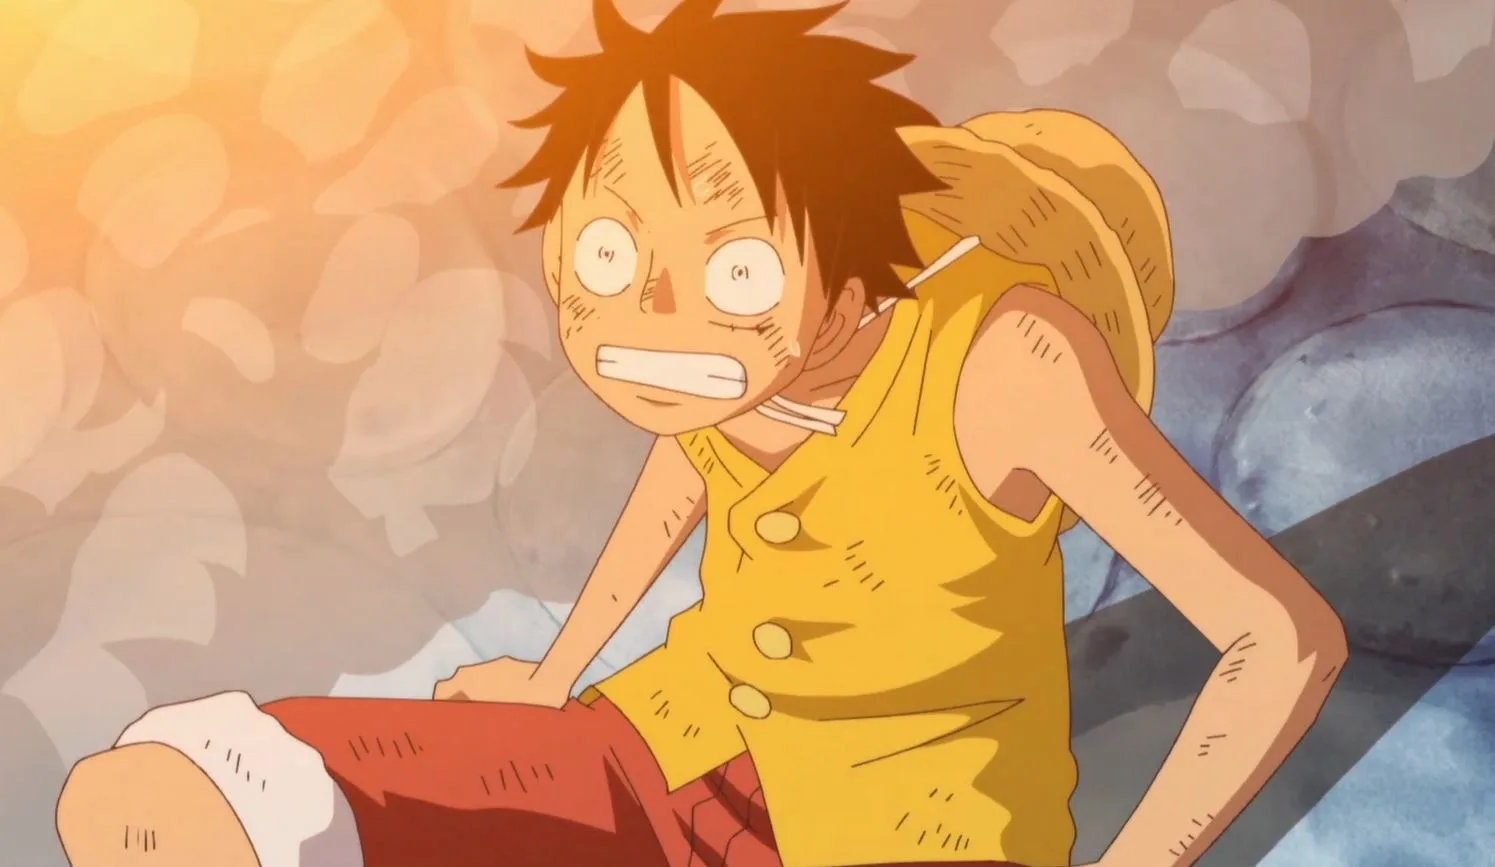 Teary-eyed Luffy's scene after the death of Ace.